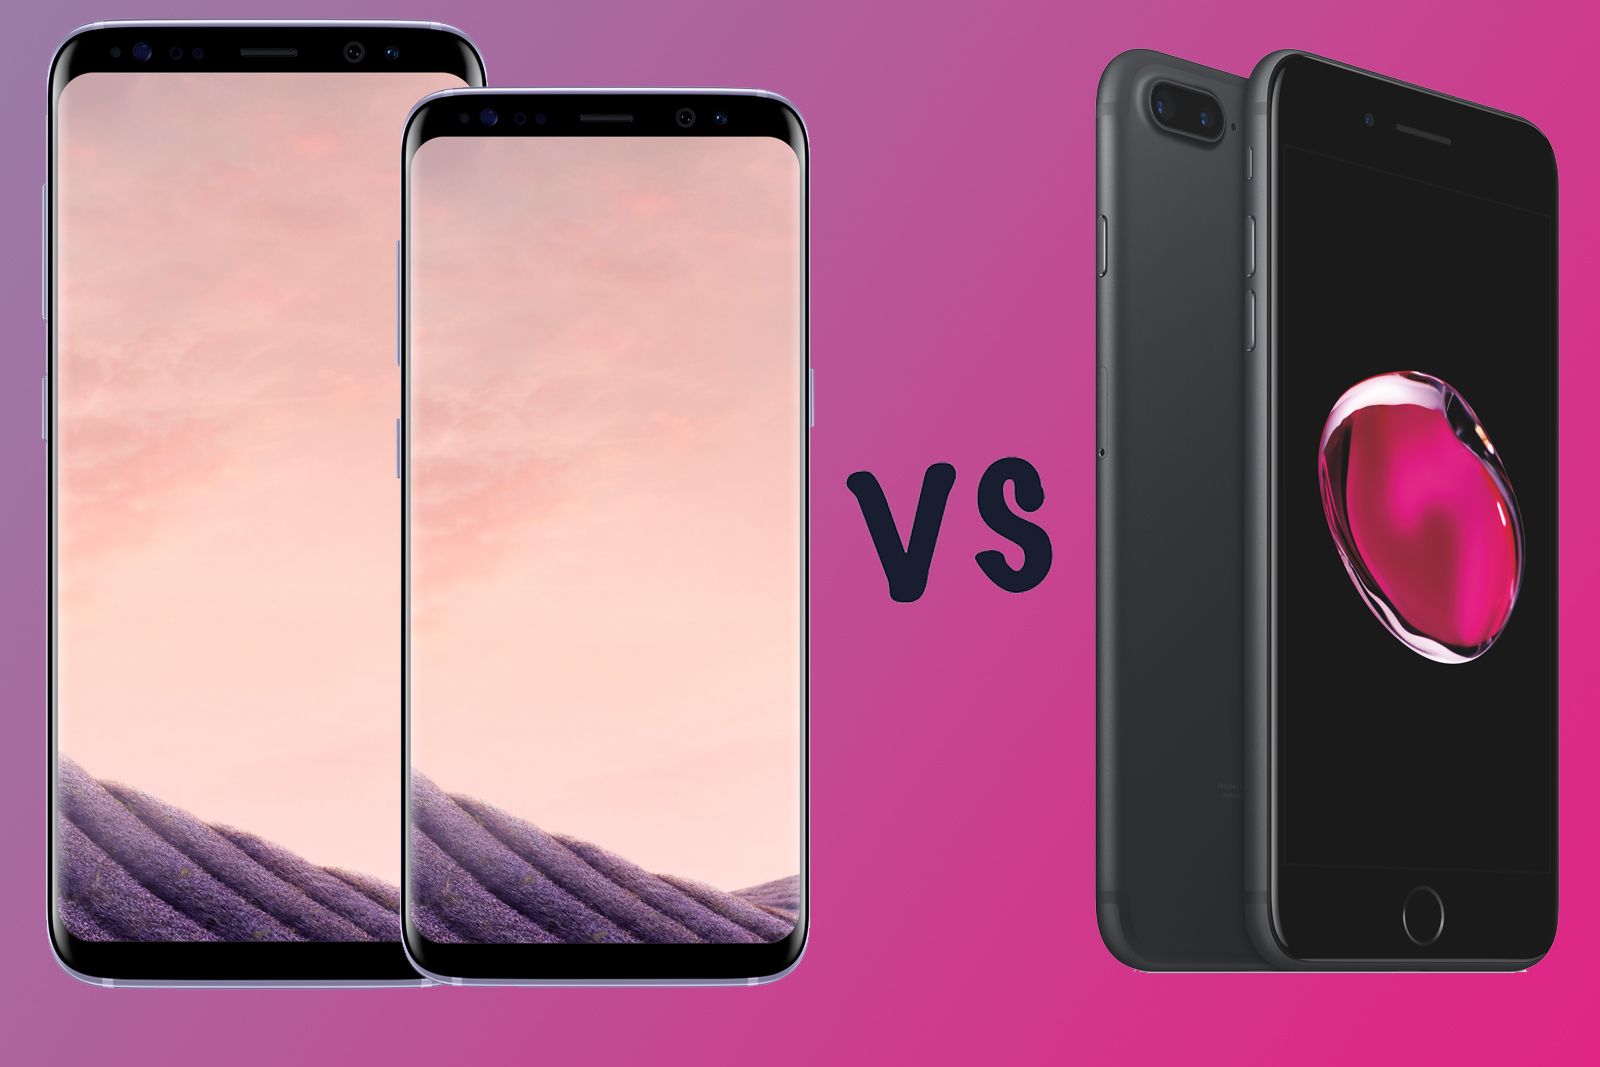 samsung galaxy s8 vs s8 plus vs apple iphone 7 plus what s the difference  image 1